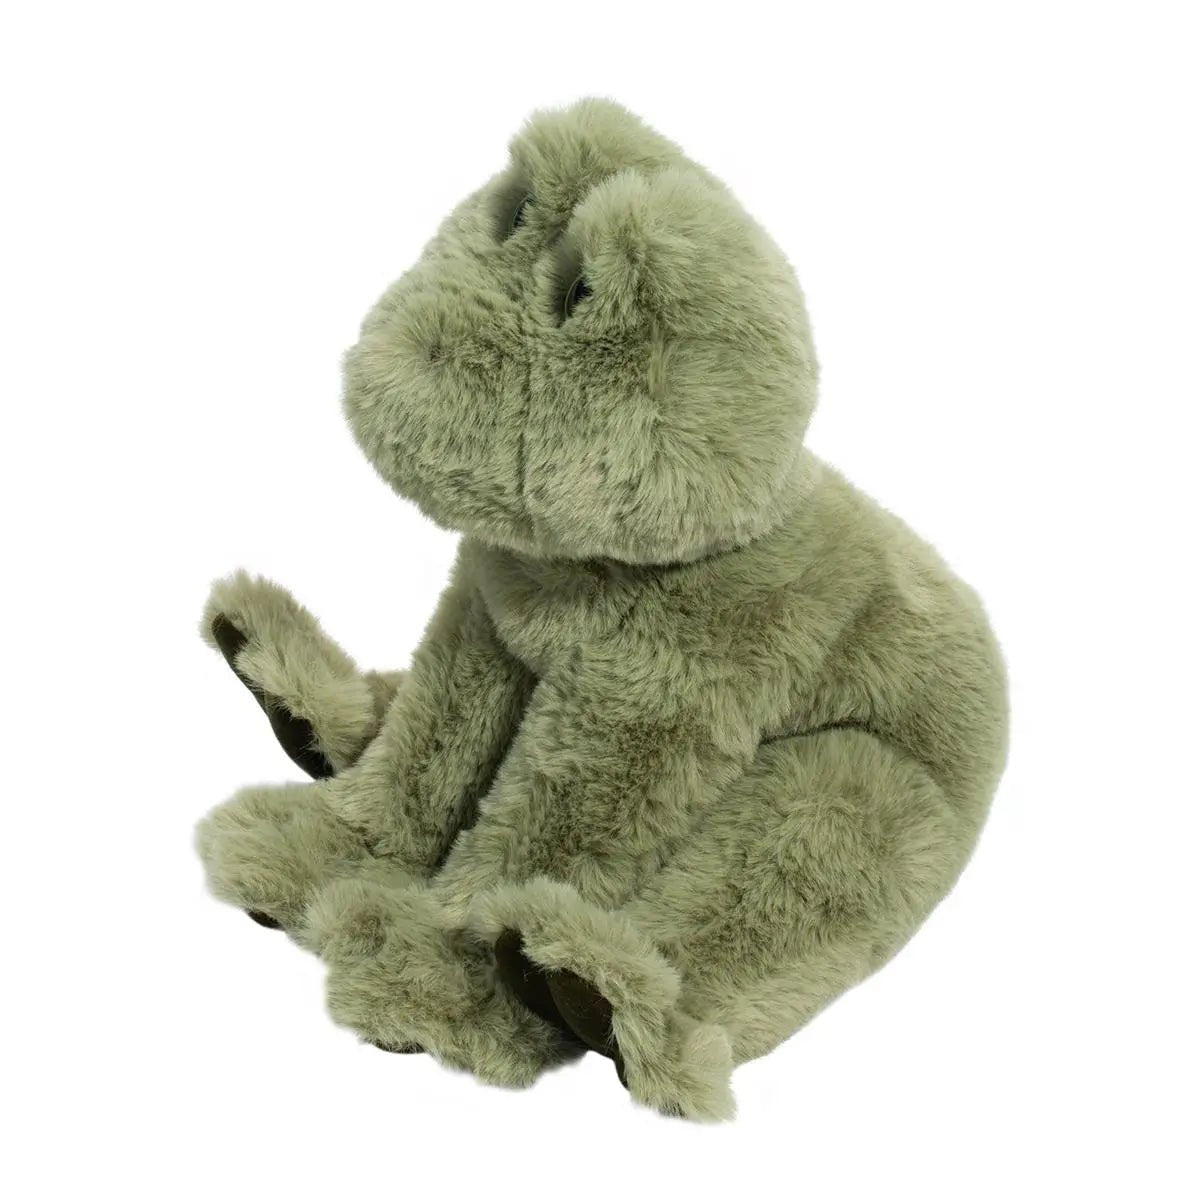 A Finnie Soft Frog from Douglas cuddles on a white background.